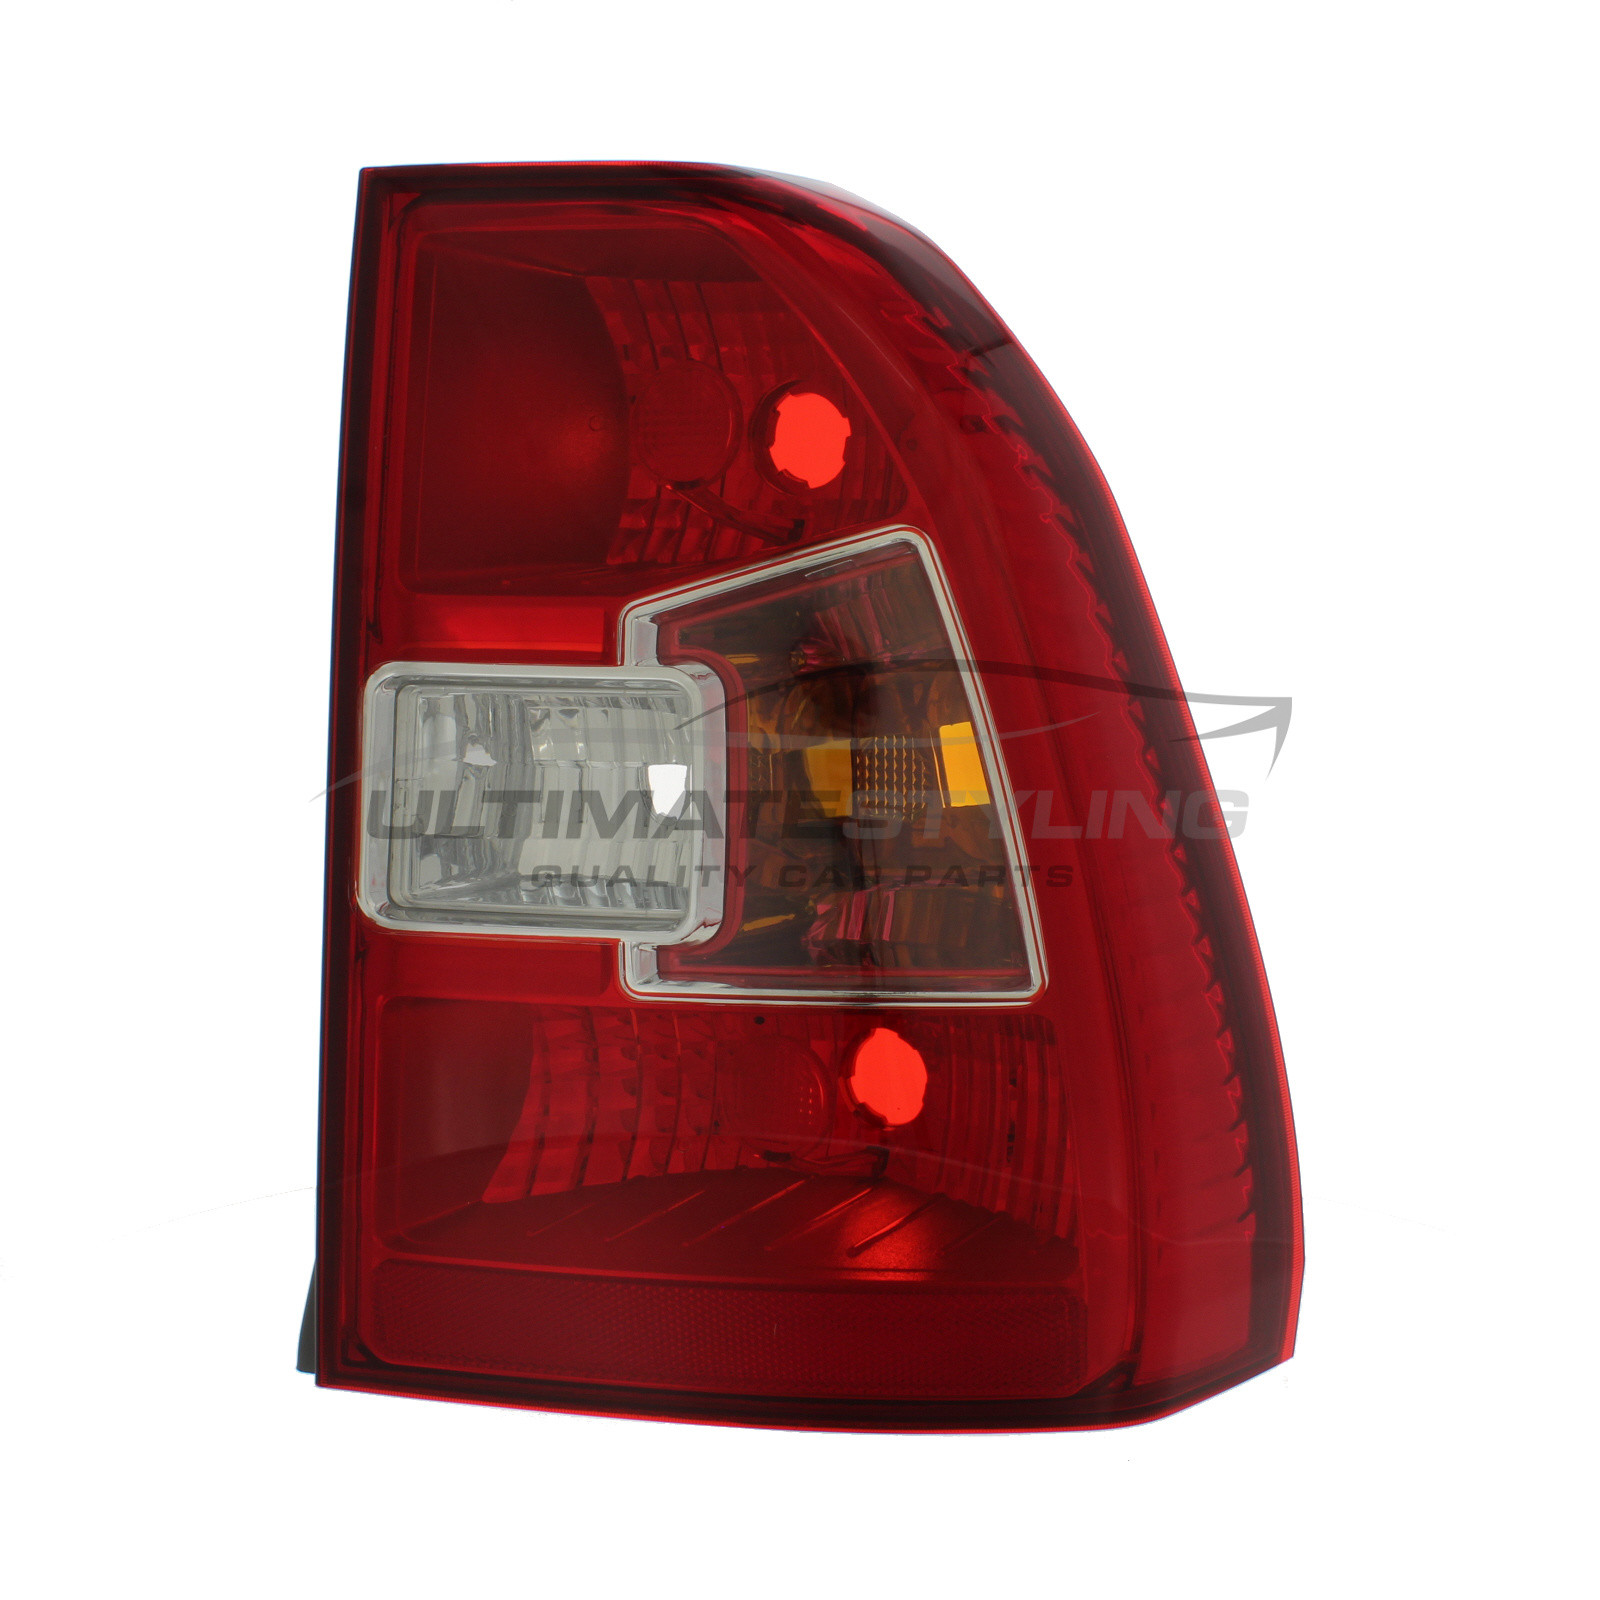 Kia Sportage 2009-2010 Non-LED with Amber Indicator Rear Light / Tail Light Excluding Bulb Holder Drivers Side (RH)